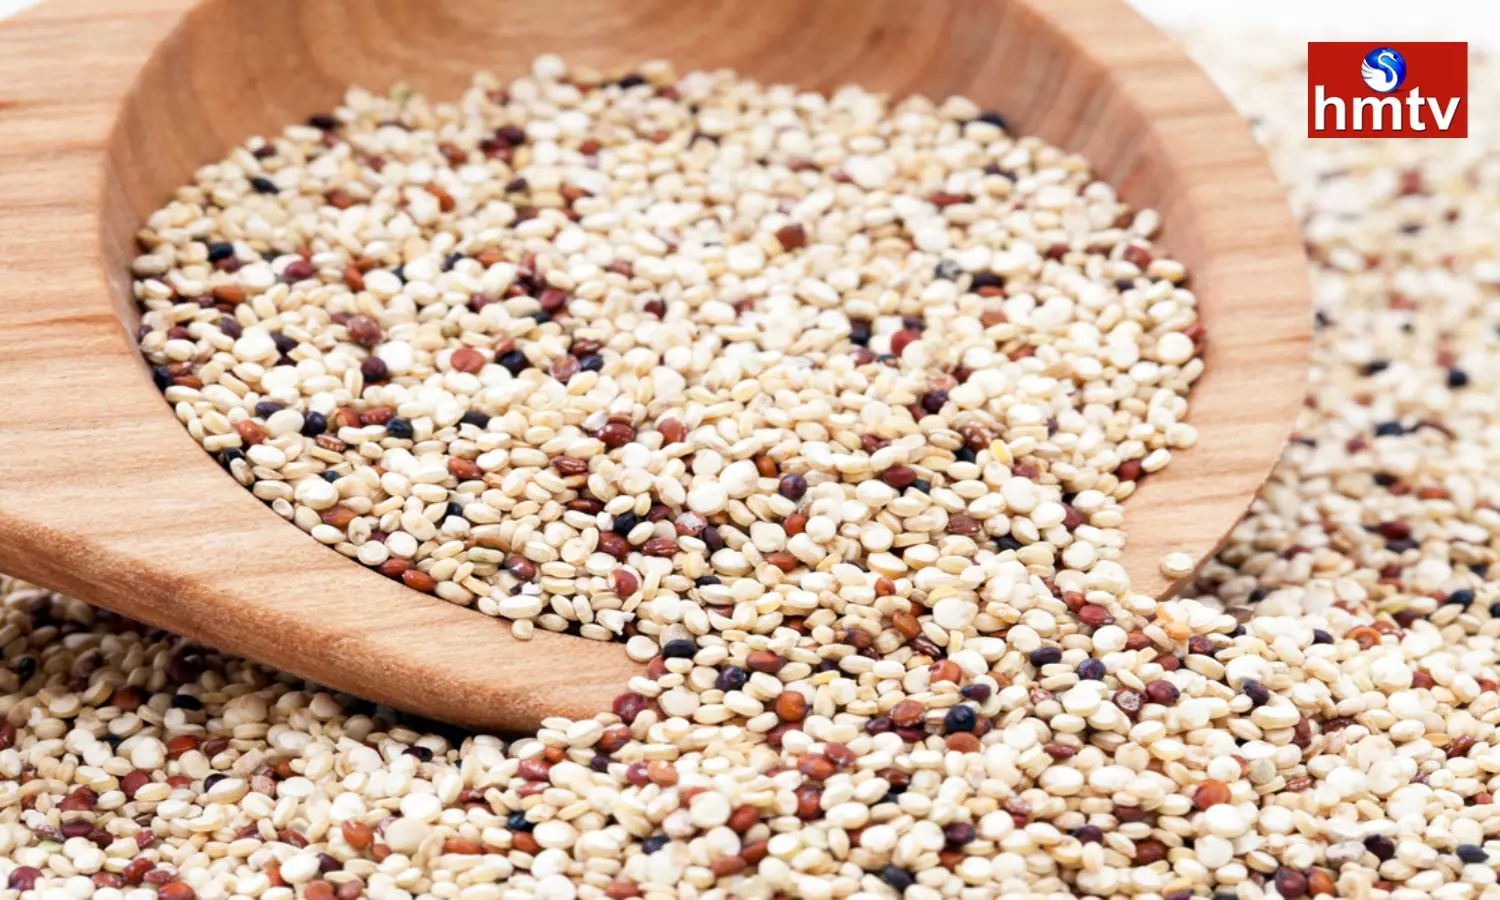 Nutrients In Quinoa Reduce The Risk Of Heart Disease And Cancer